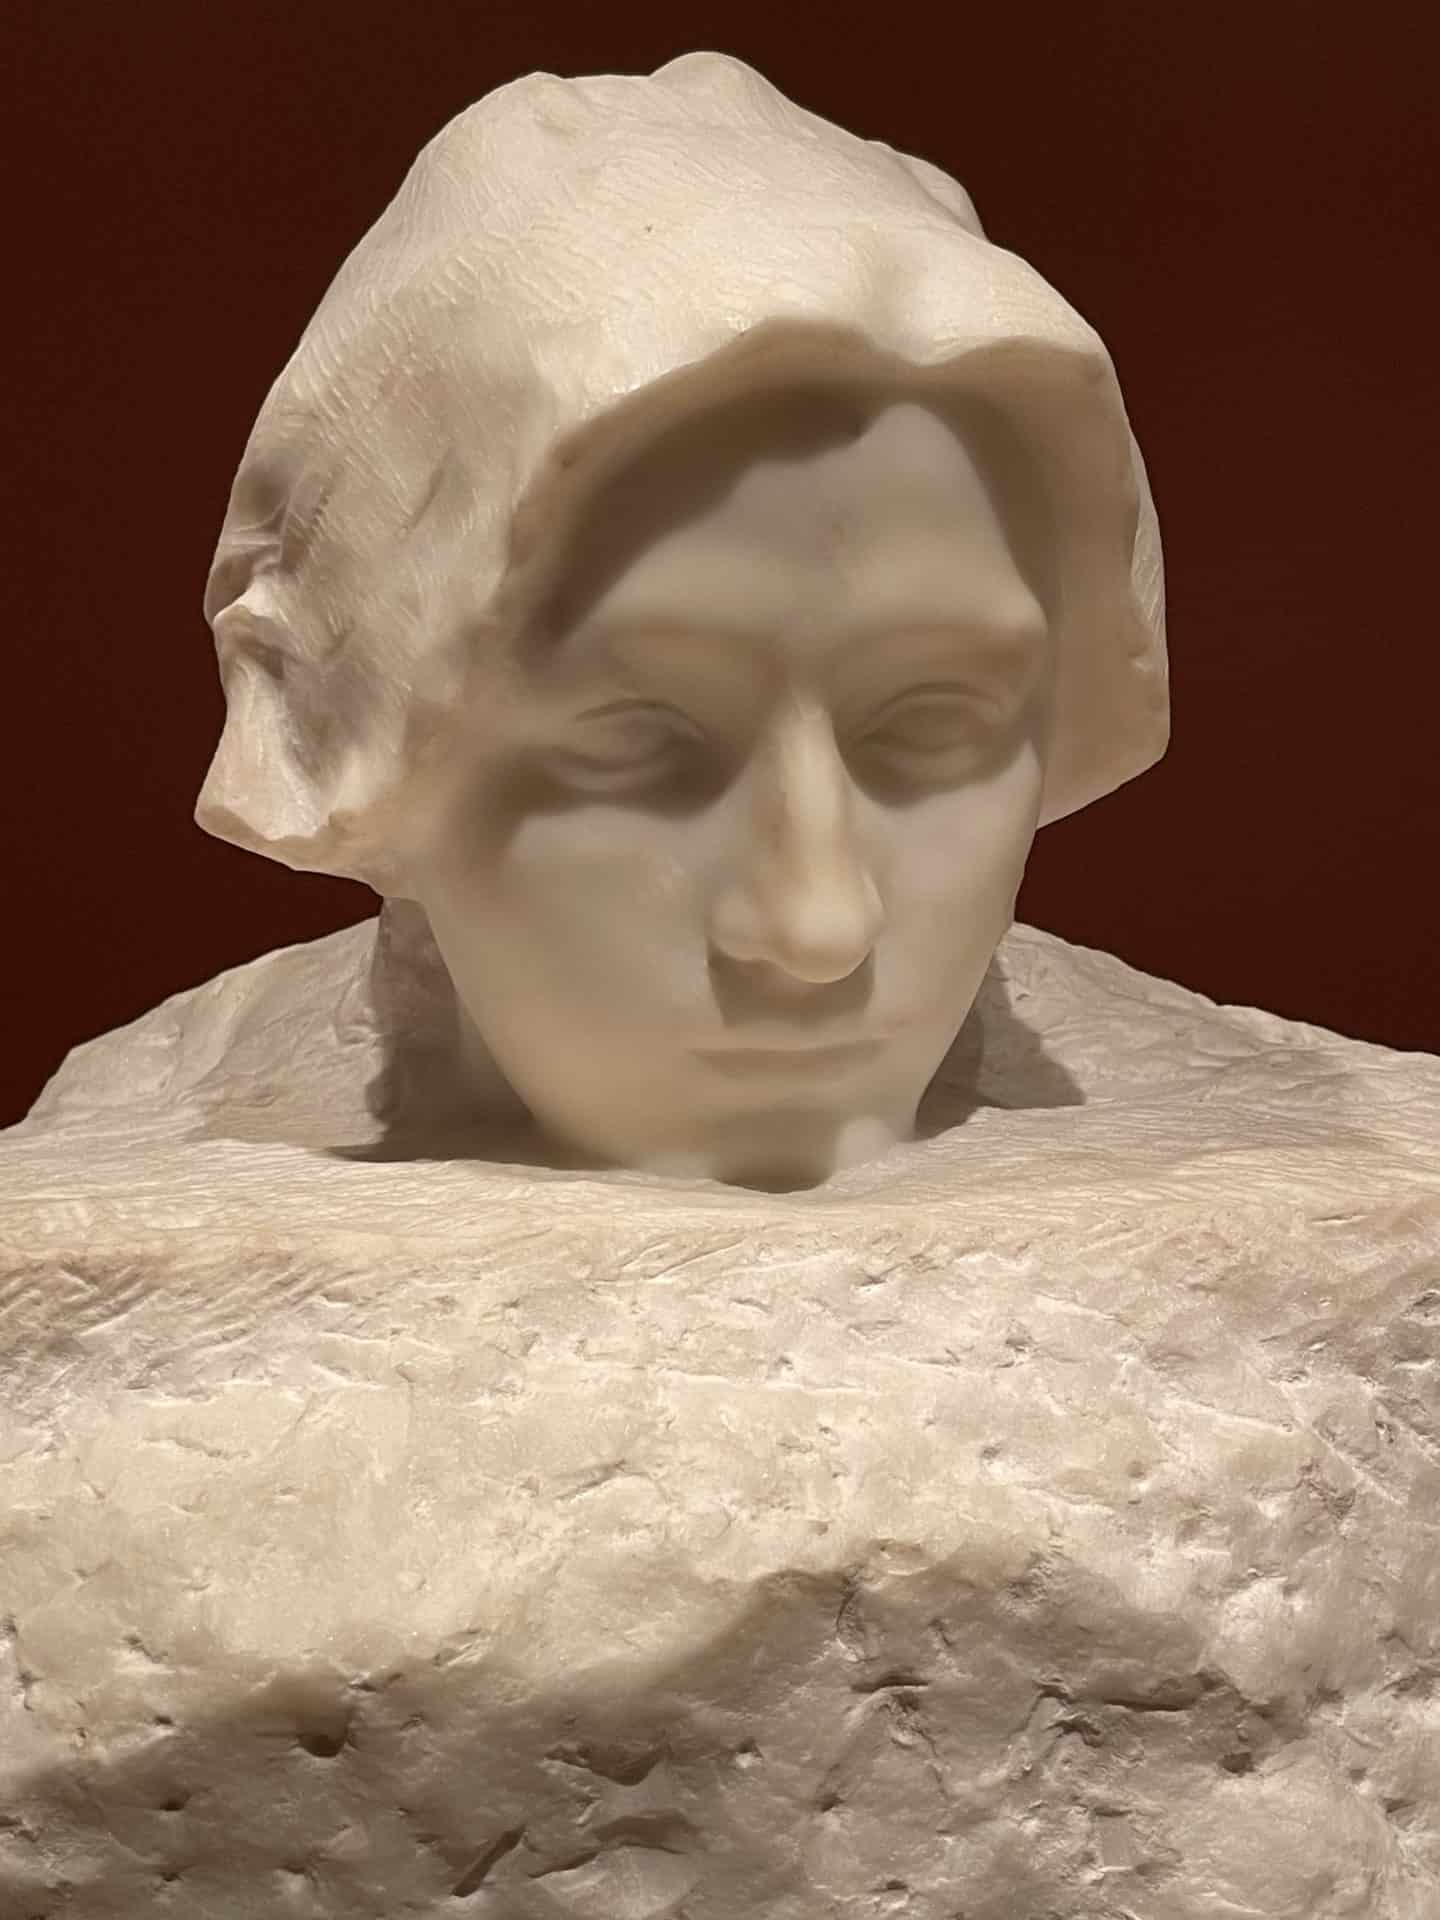 Rodin's sculpture shows Camille Claudel encased to the chin in marble.